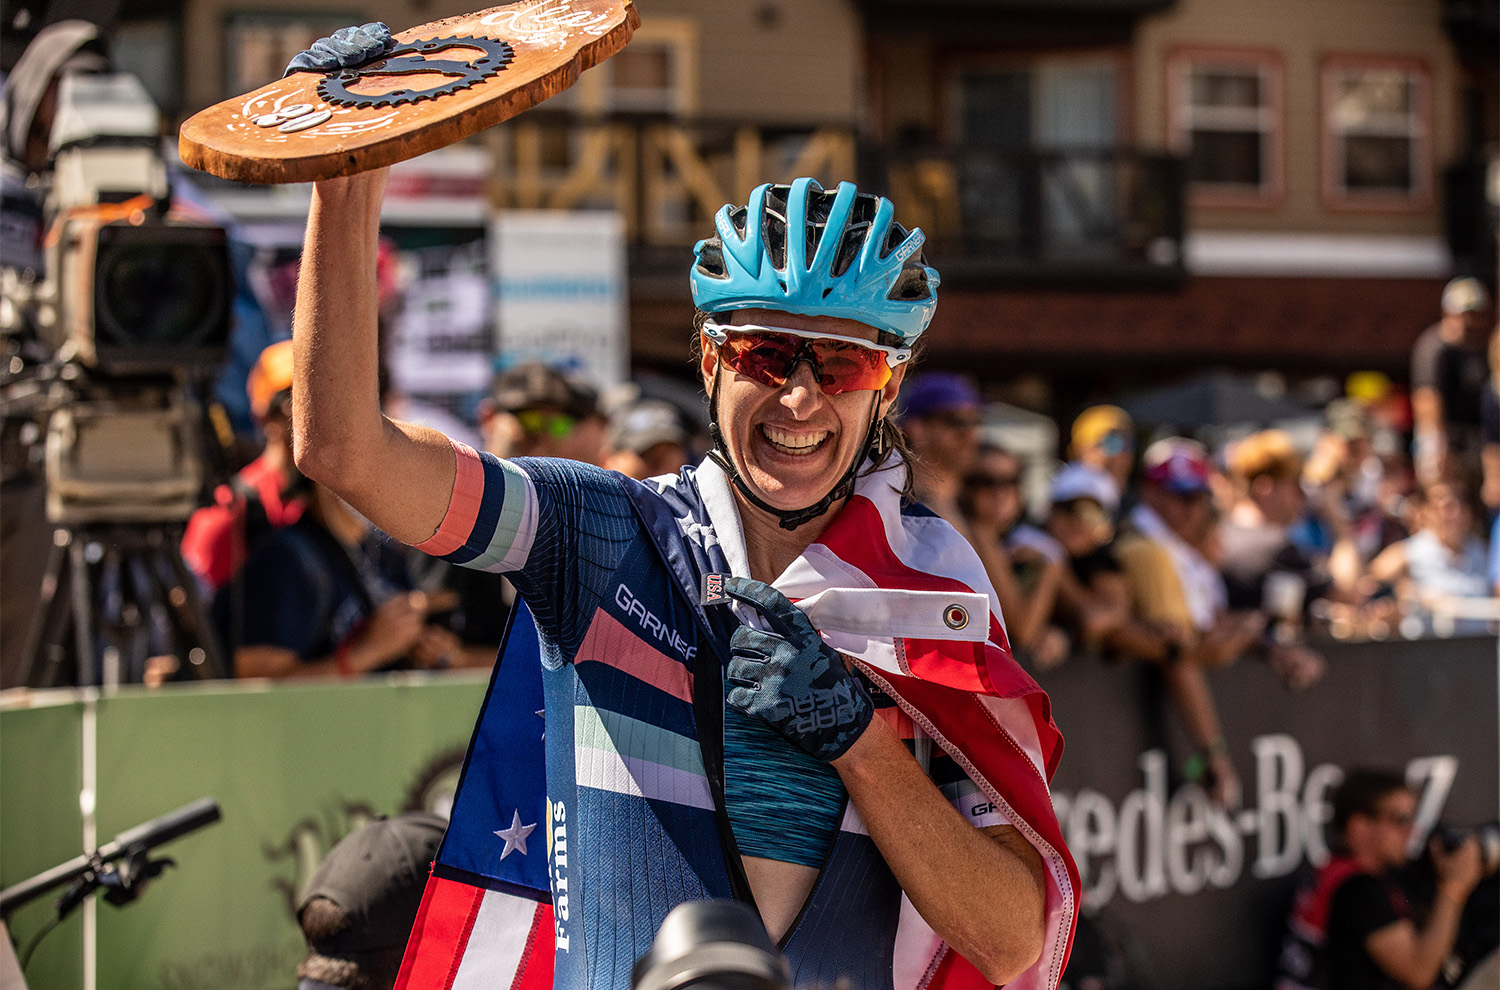 Lea Davison announced her retirement from international racing after the final World Cup of the 2021 season, but she’s definitely not walking away from bikes or racing. So on this week’s episode of Bikes & Big Ideas, we sat down with the two-time Olympian and 20-plus year XC pro to talk about the career that’s taken up her entire adult life to this point; the highs and the lows; the state of XC racing; mentorship & career evolution; what comes next, and a whole lot more.